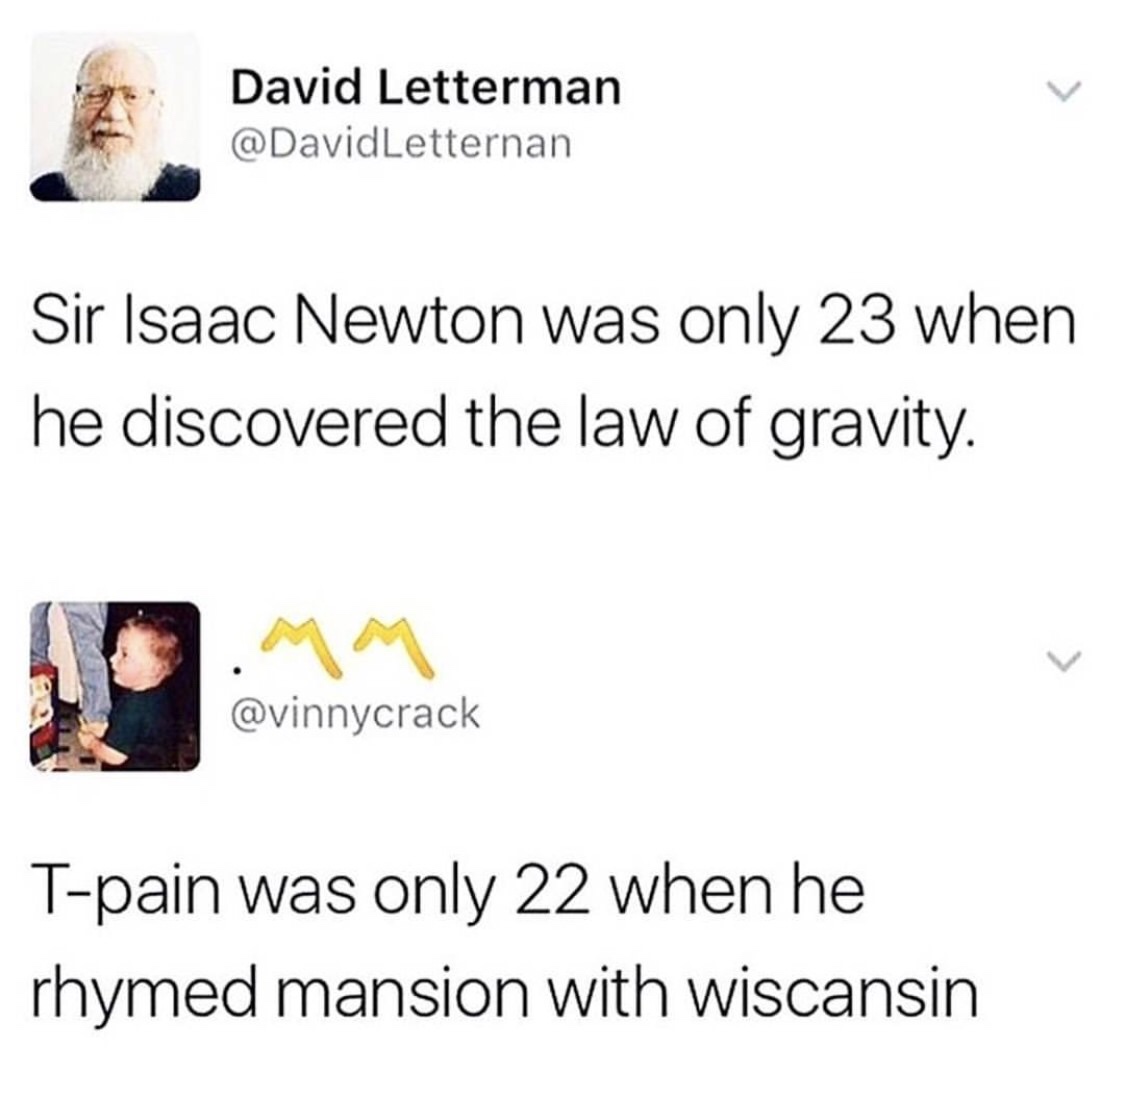 mansion with wiscansin - David Letterman Letternan Sir Isaac Newton was only 23 when he discovered the law of gravity. Tpain was only 22 when he rhymed mansion with wiscansin